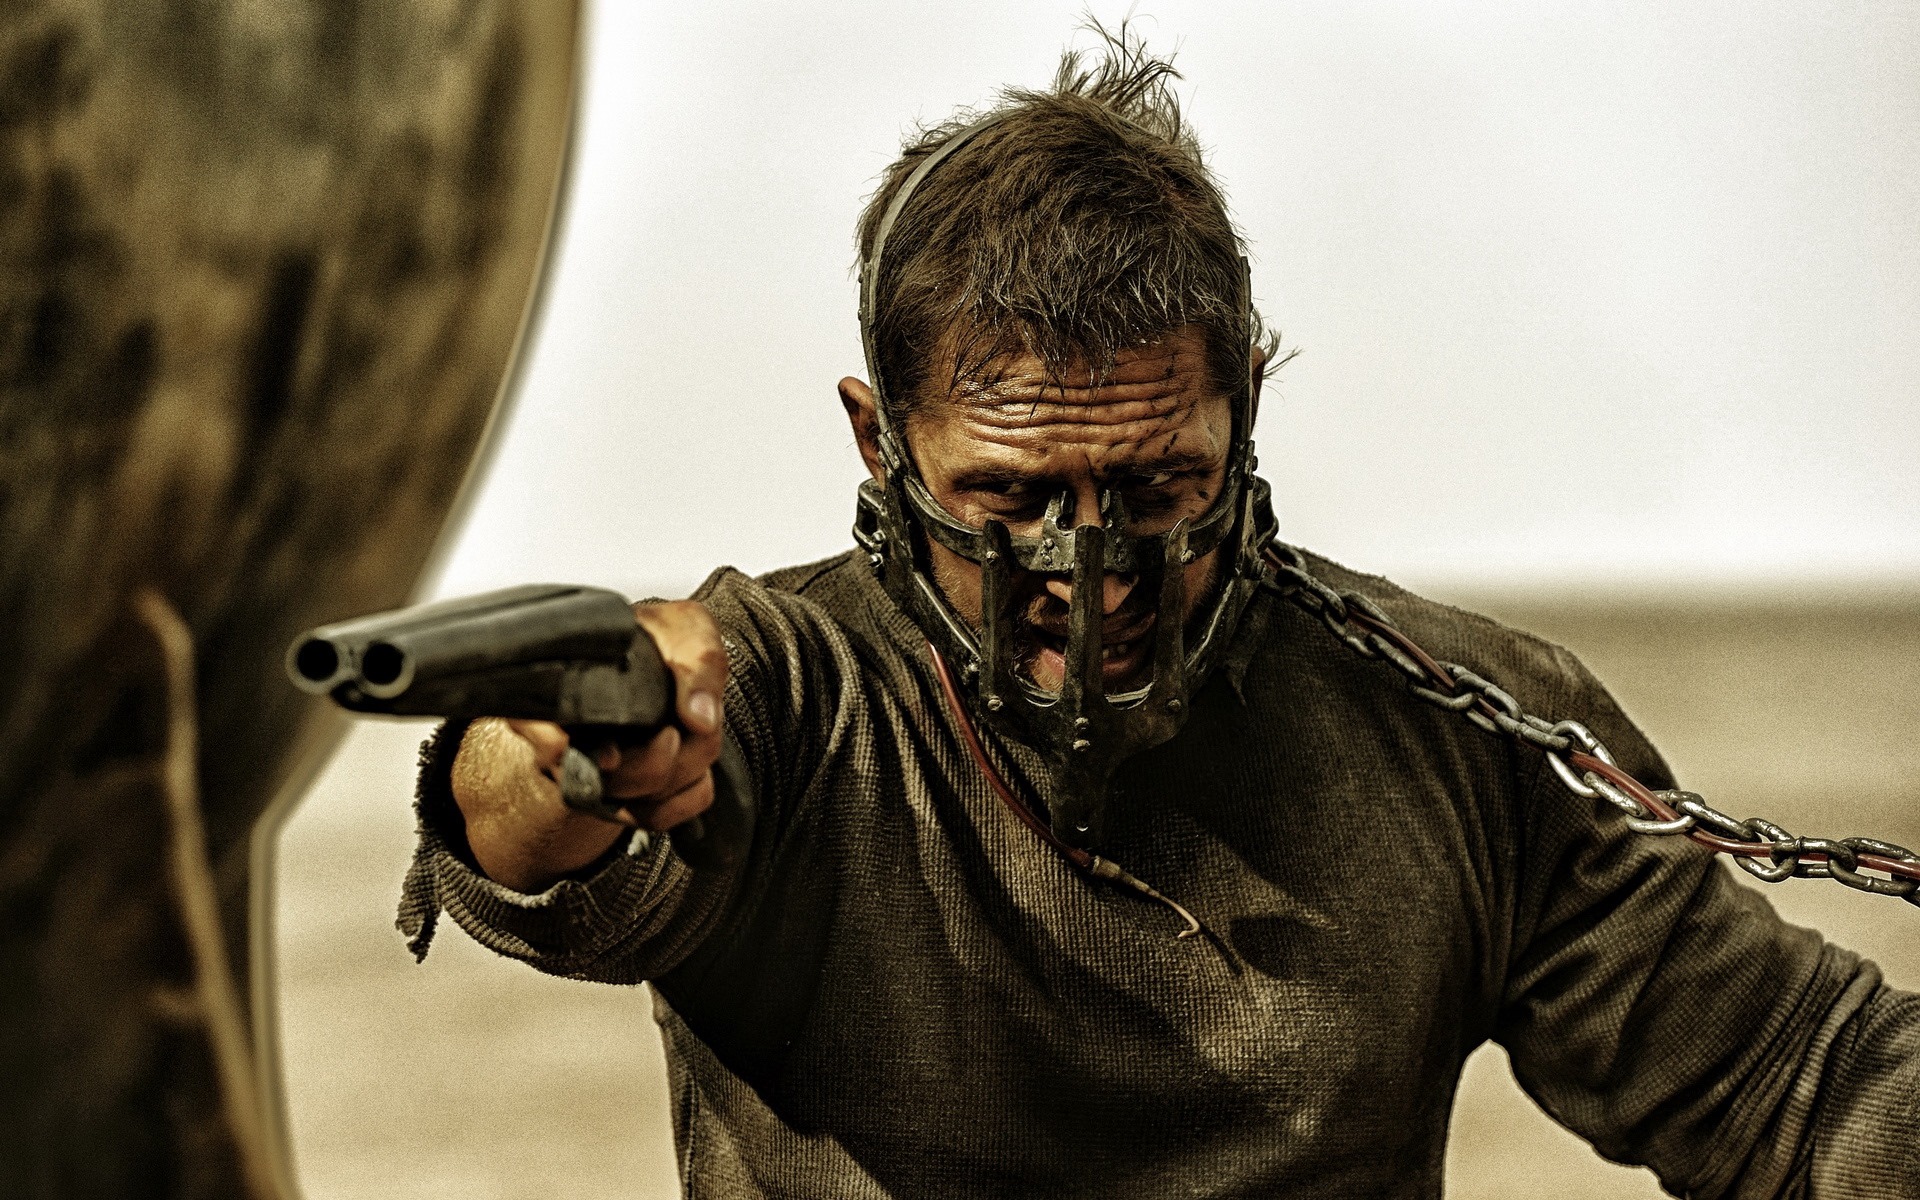 Mad Max: Fury Road, HD movie wallpapers #40 - 1920x1200